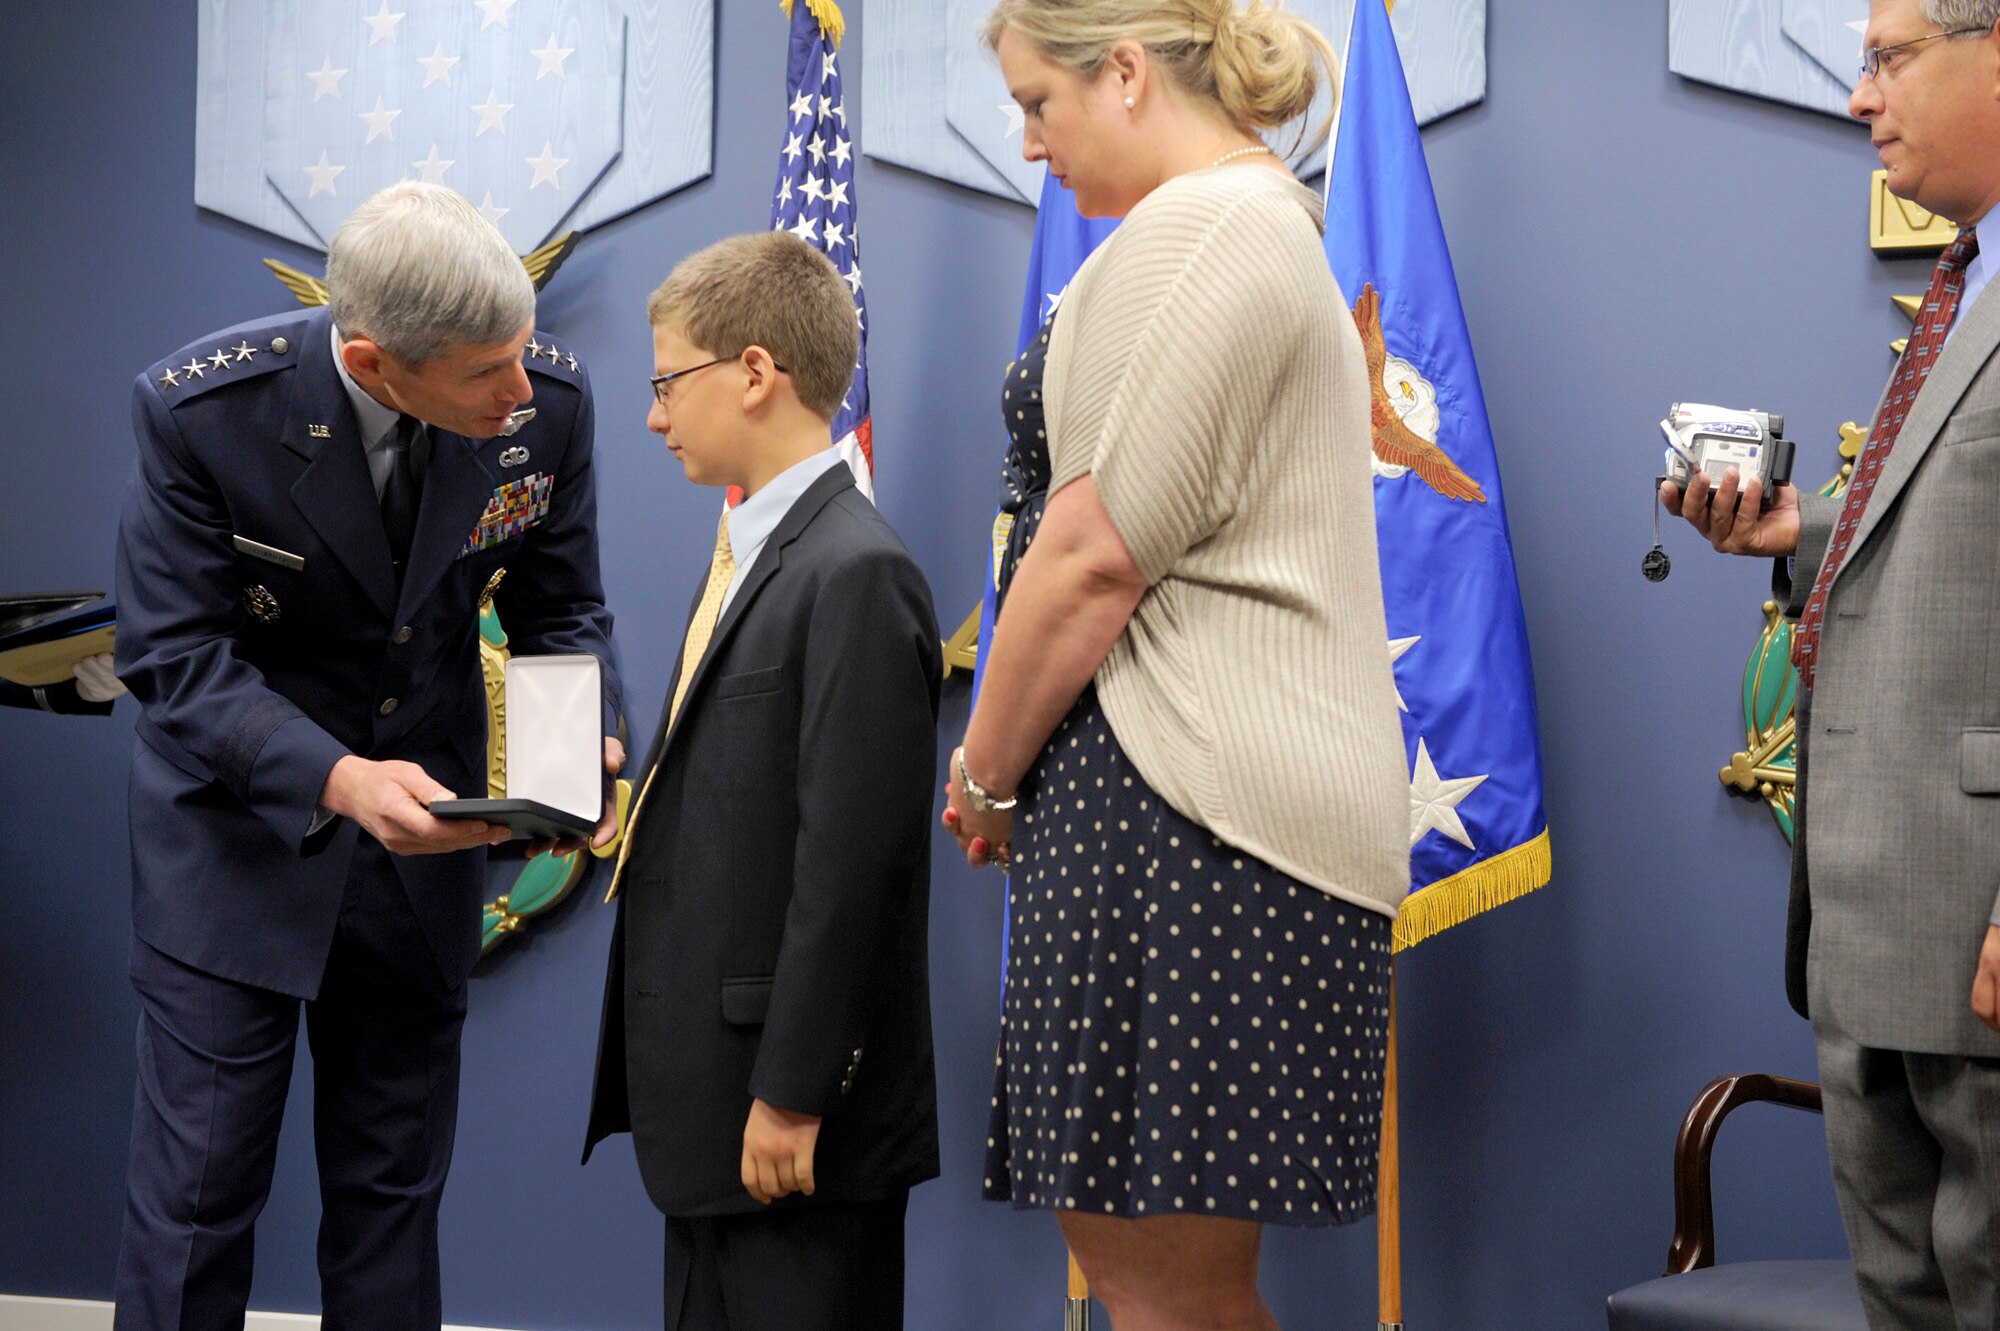 Air Force Chief of Staff Gen. Norton Schwartz presents the Silver Star, posthumously awarded to Capt. Francis Gary Powers, to the captain’s grandchildren, Francis Gary “Trey” Powers III and Lindsey Barry, on June 15, 2012, in the Pentagon. Captain Powers was shot down over the Soviet Union on May 1, 1960, and received the decoration for the heroism he displayed while held prisoner by the Soviets.  He was released in 1962 but subsequently died in a 1977 helicopter crash. (U.S. Air Force photo/Senior Airman Christina Brownlow)